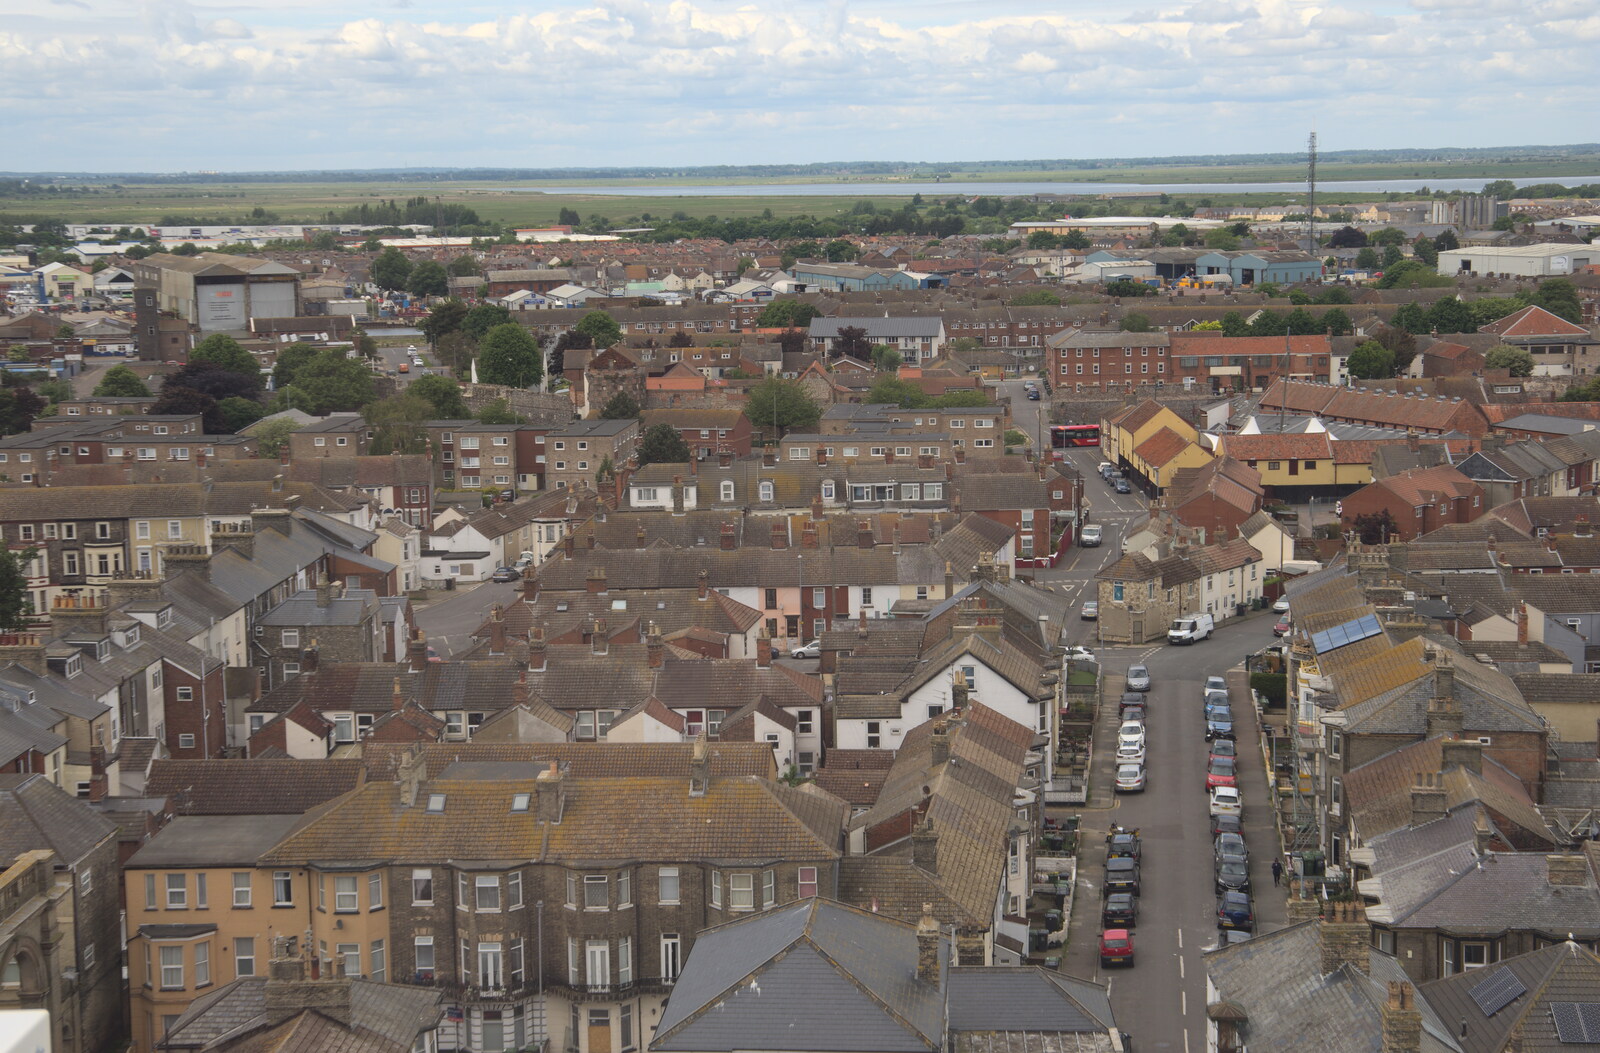 A view into an older Great Yarmouth from Faded Seaside Glamour: A Weekend in Great Yarmouth, Norfolk - 29th May 2022